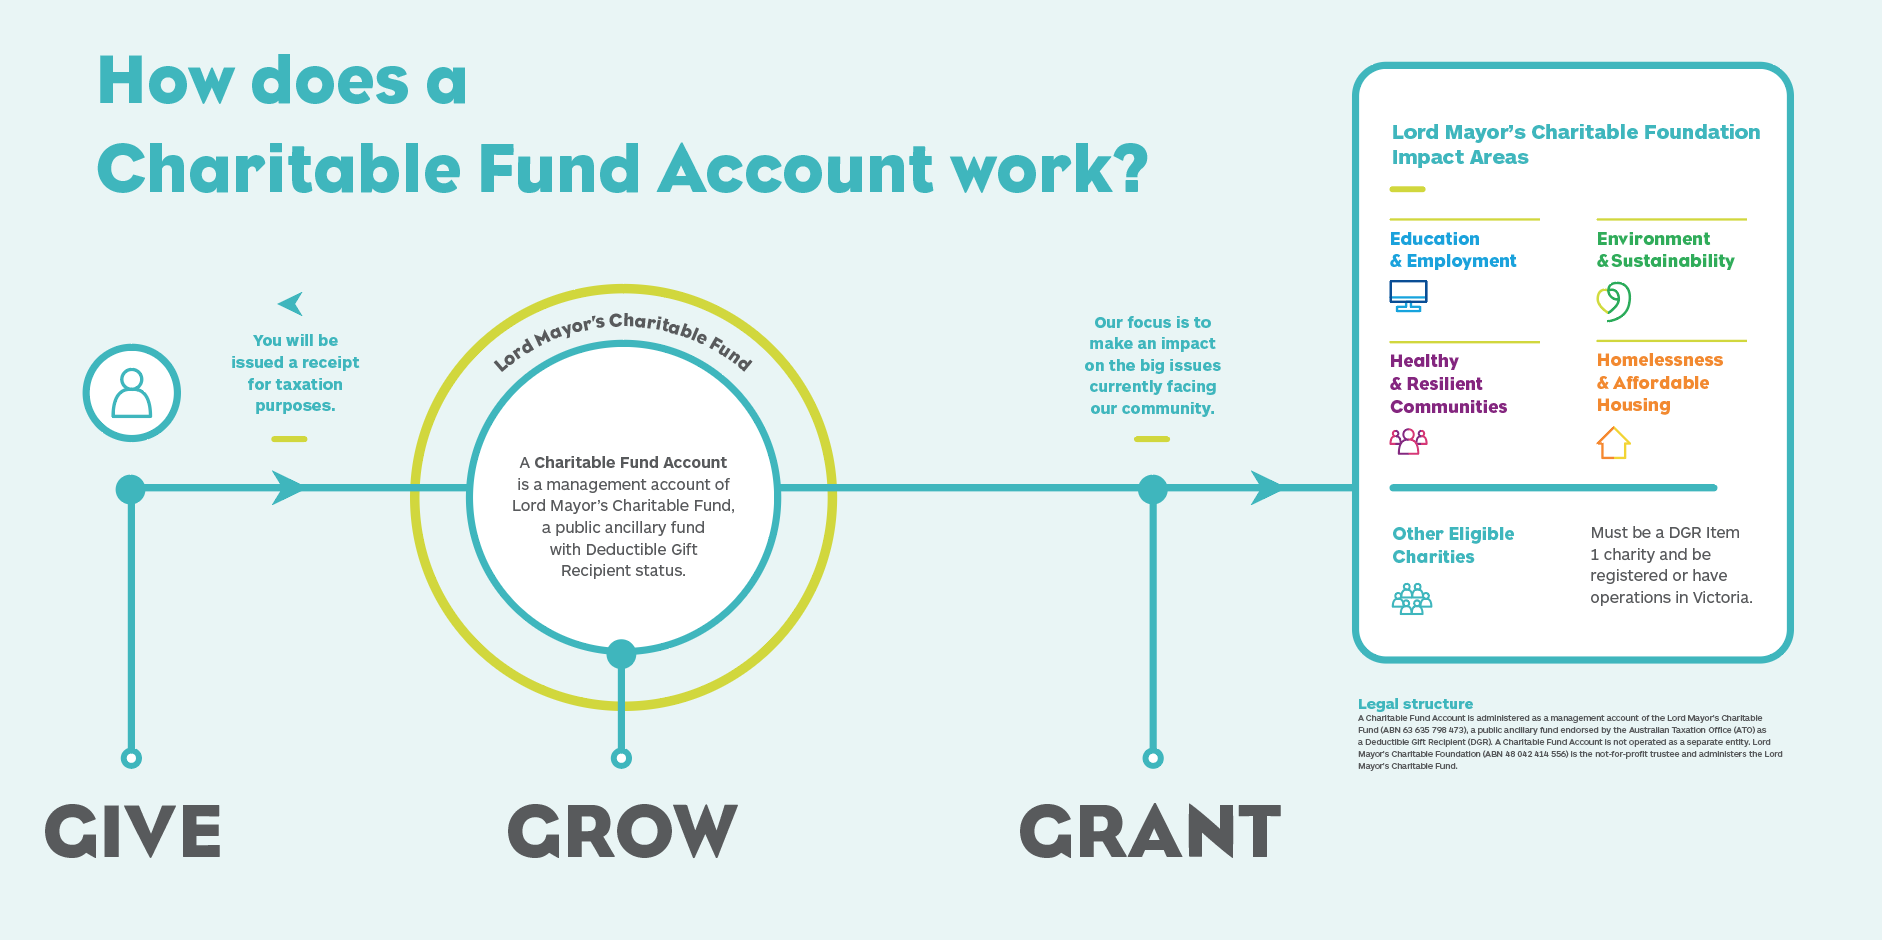 Diagram explaining how a Charitable Fund Account works.